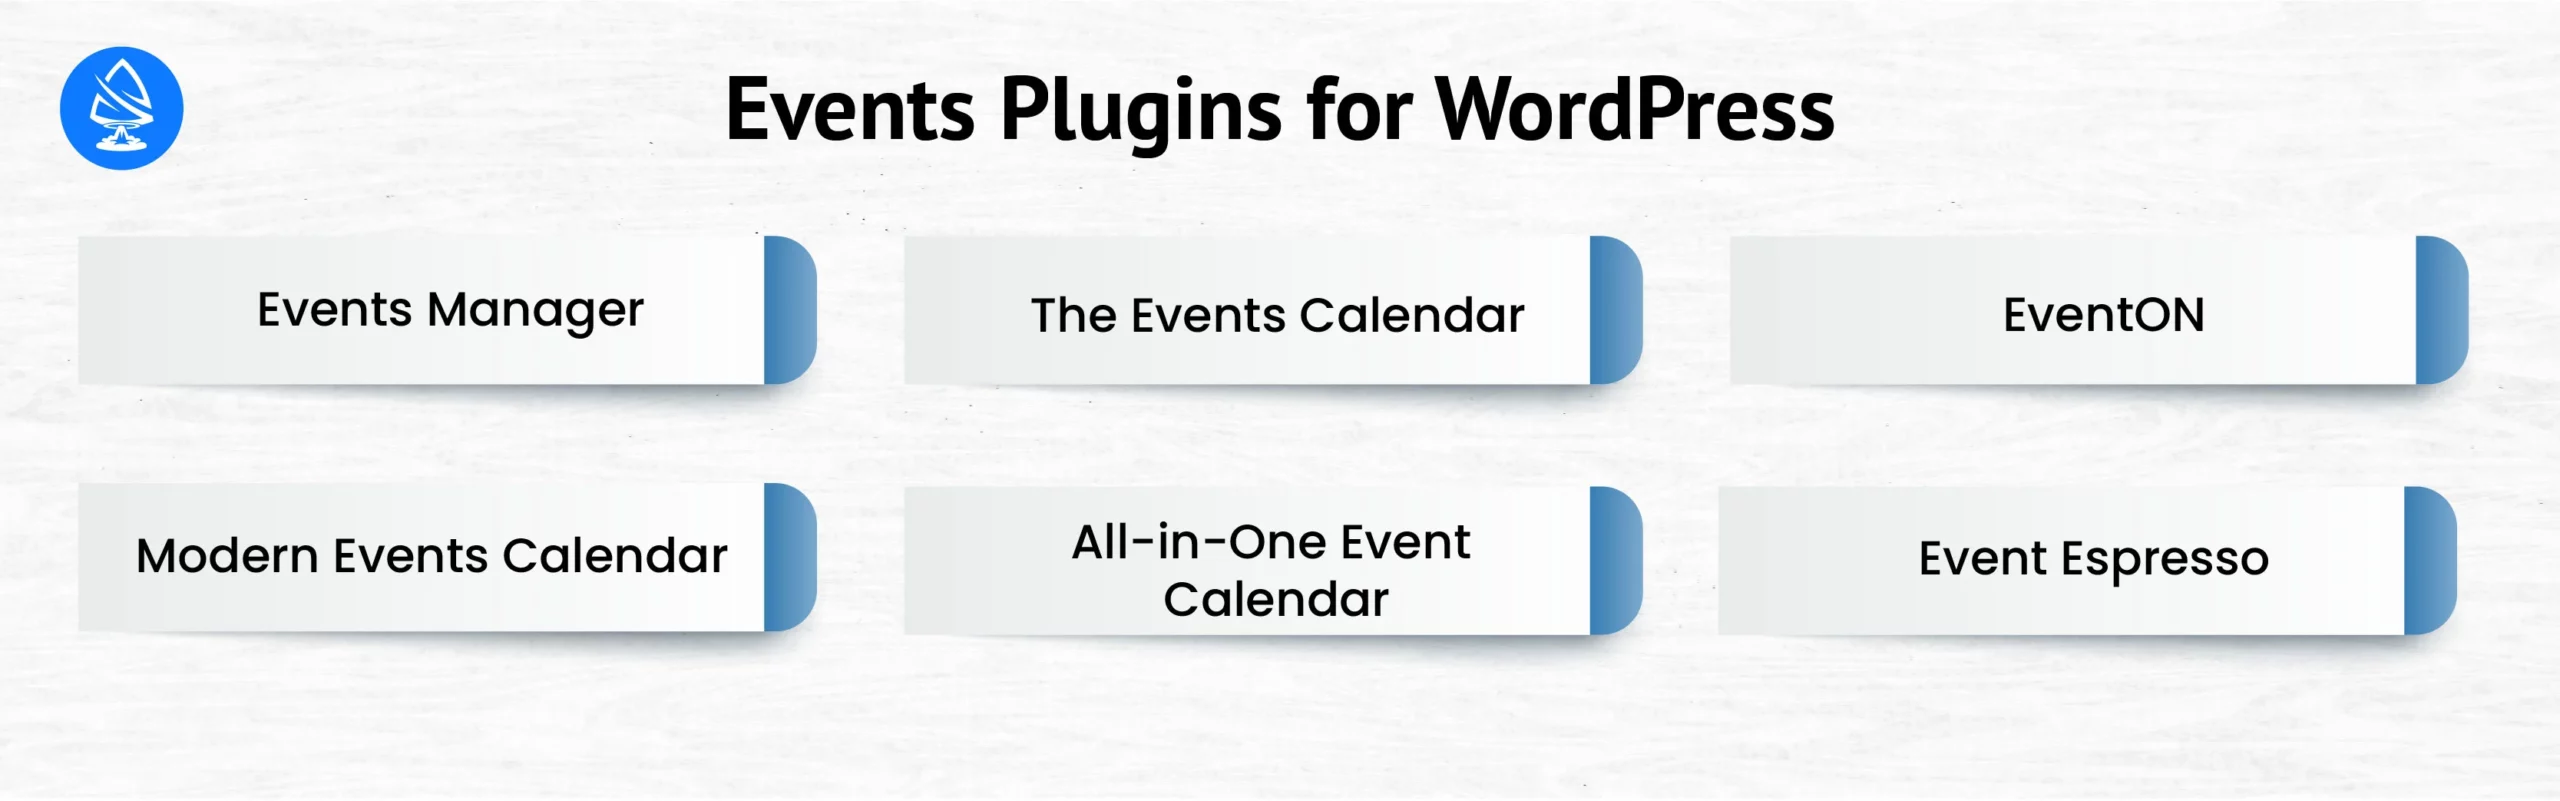 Events Plugins for WordPress